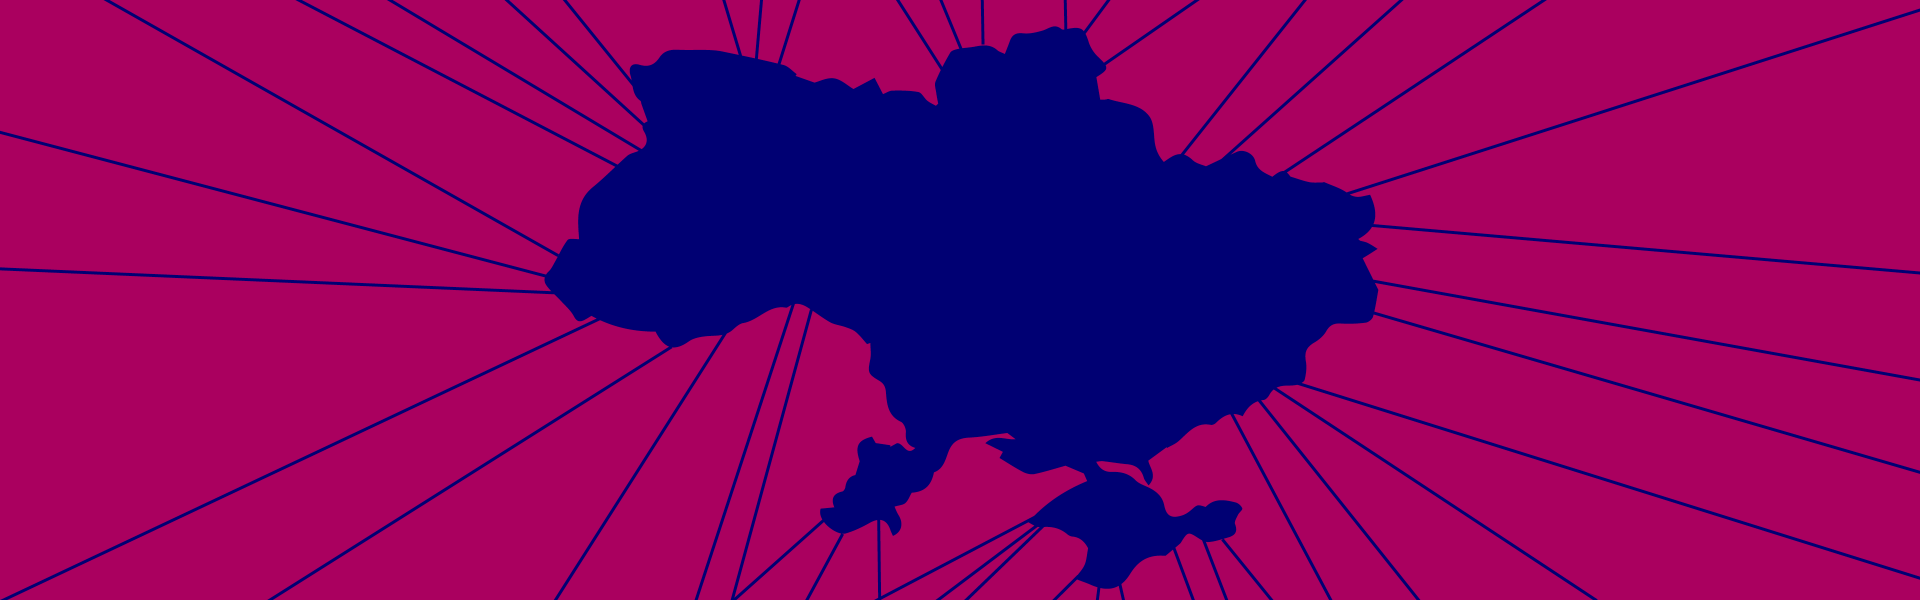 Graphic: The shape of Ukraine in blue against berry background with rays coming out of it. 